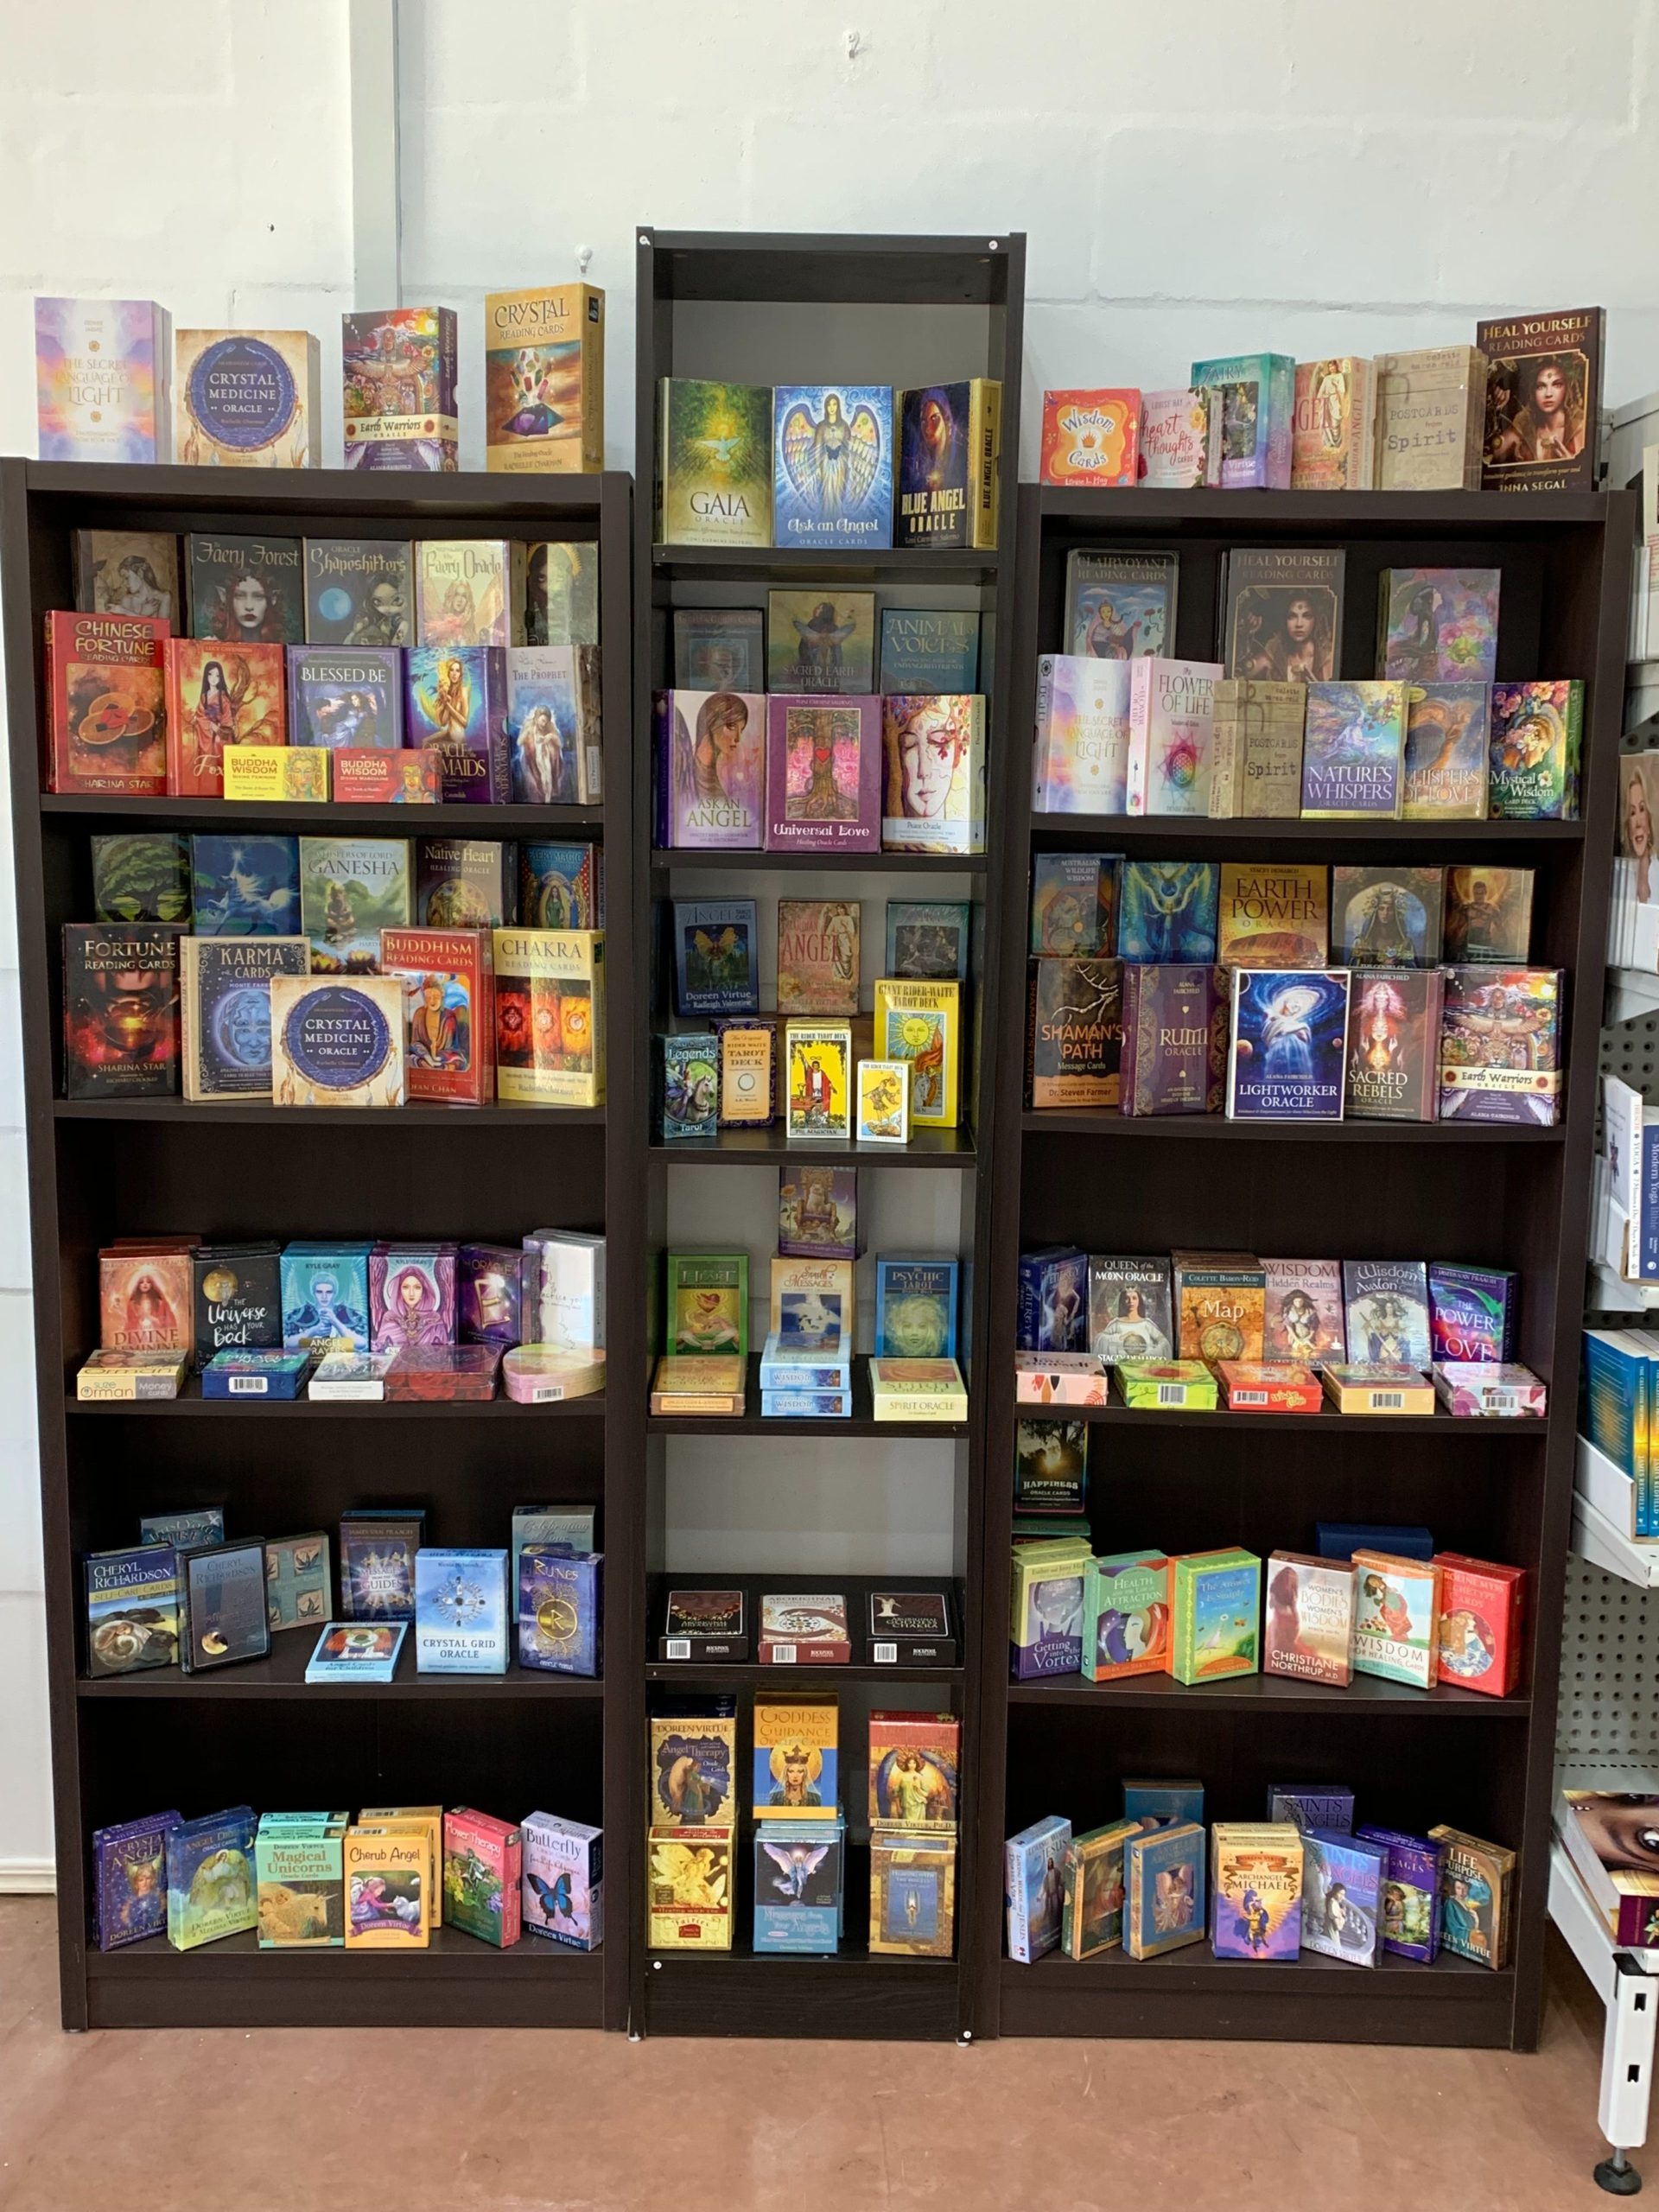 Queensland's largest Tarot collection